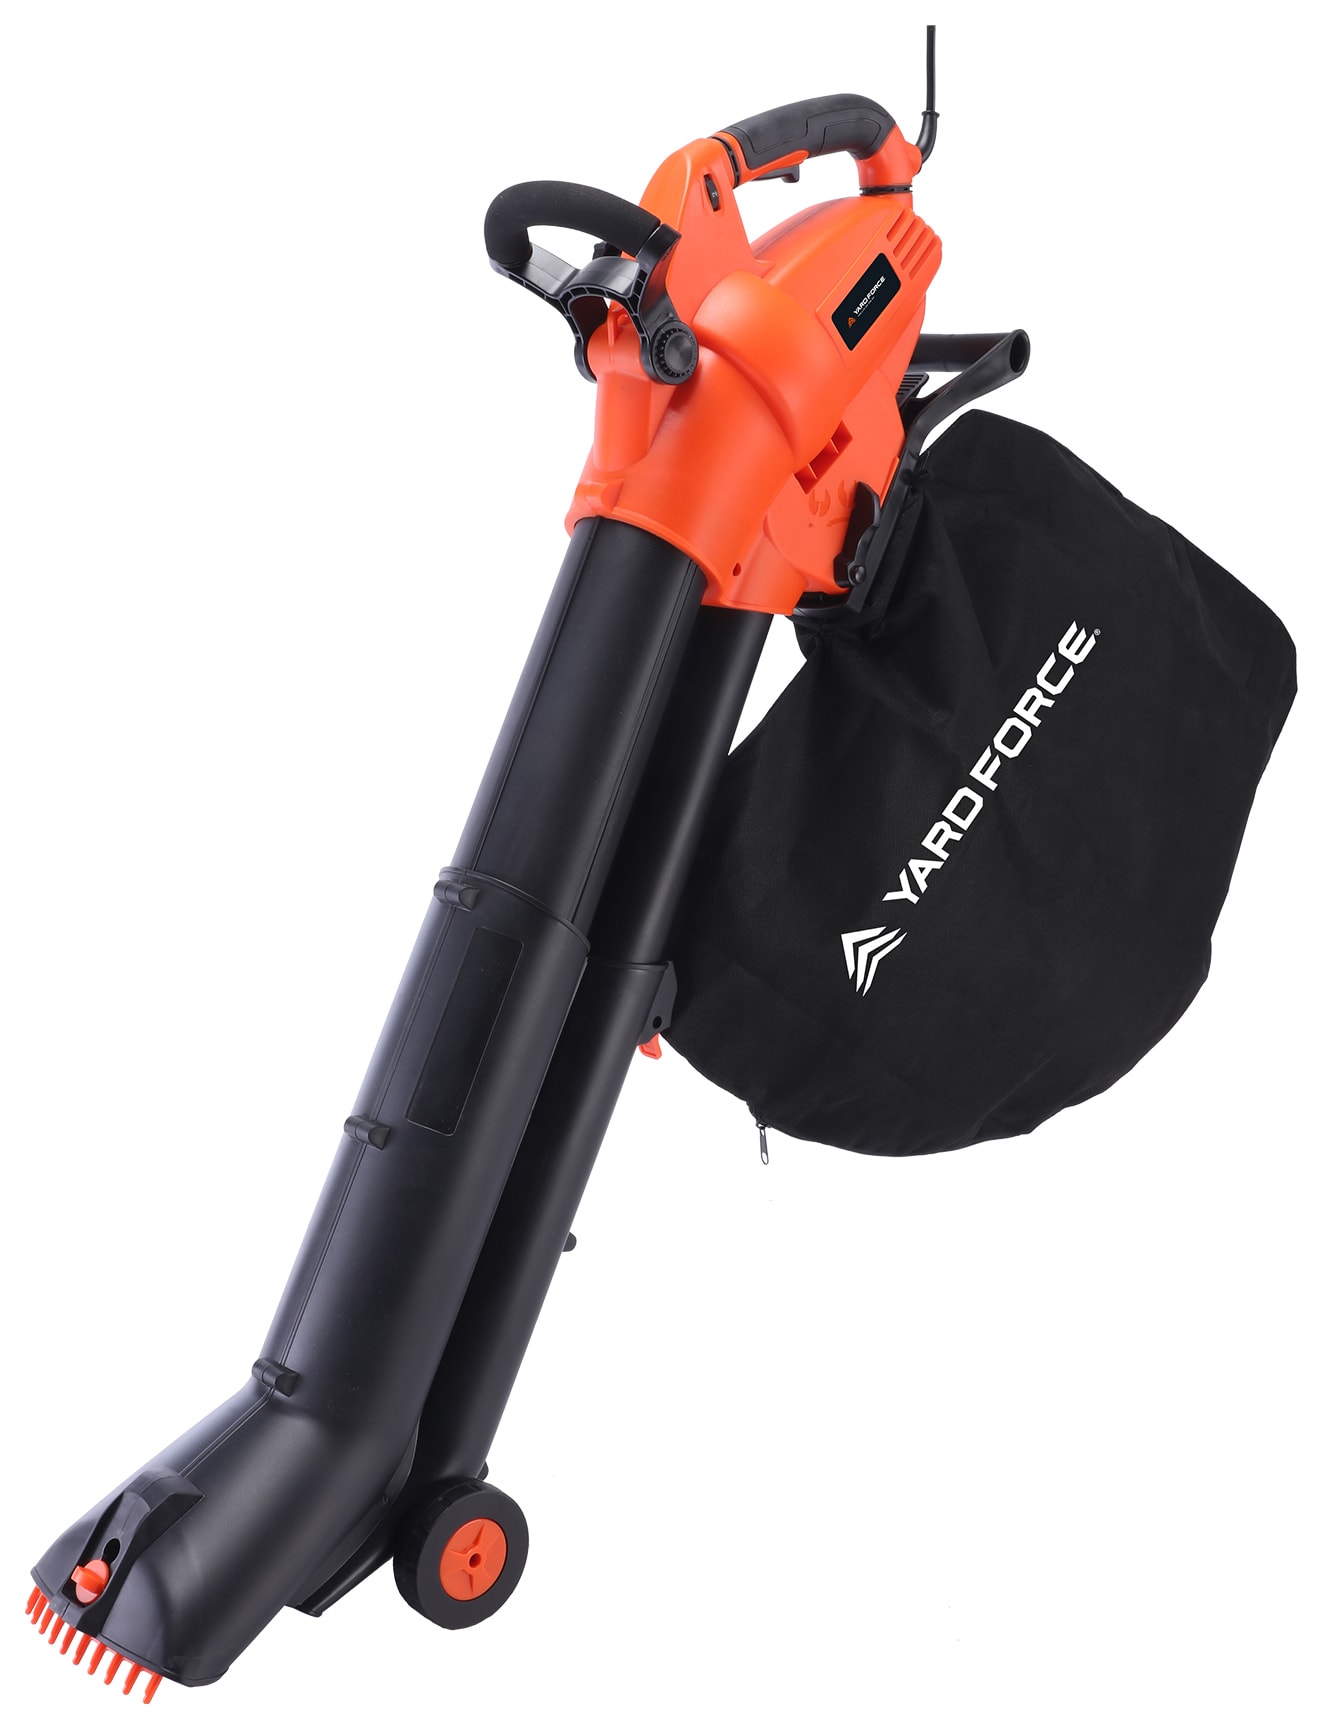 3000W 3-in-1 Electric Backpack Blower Vacuum